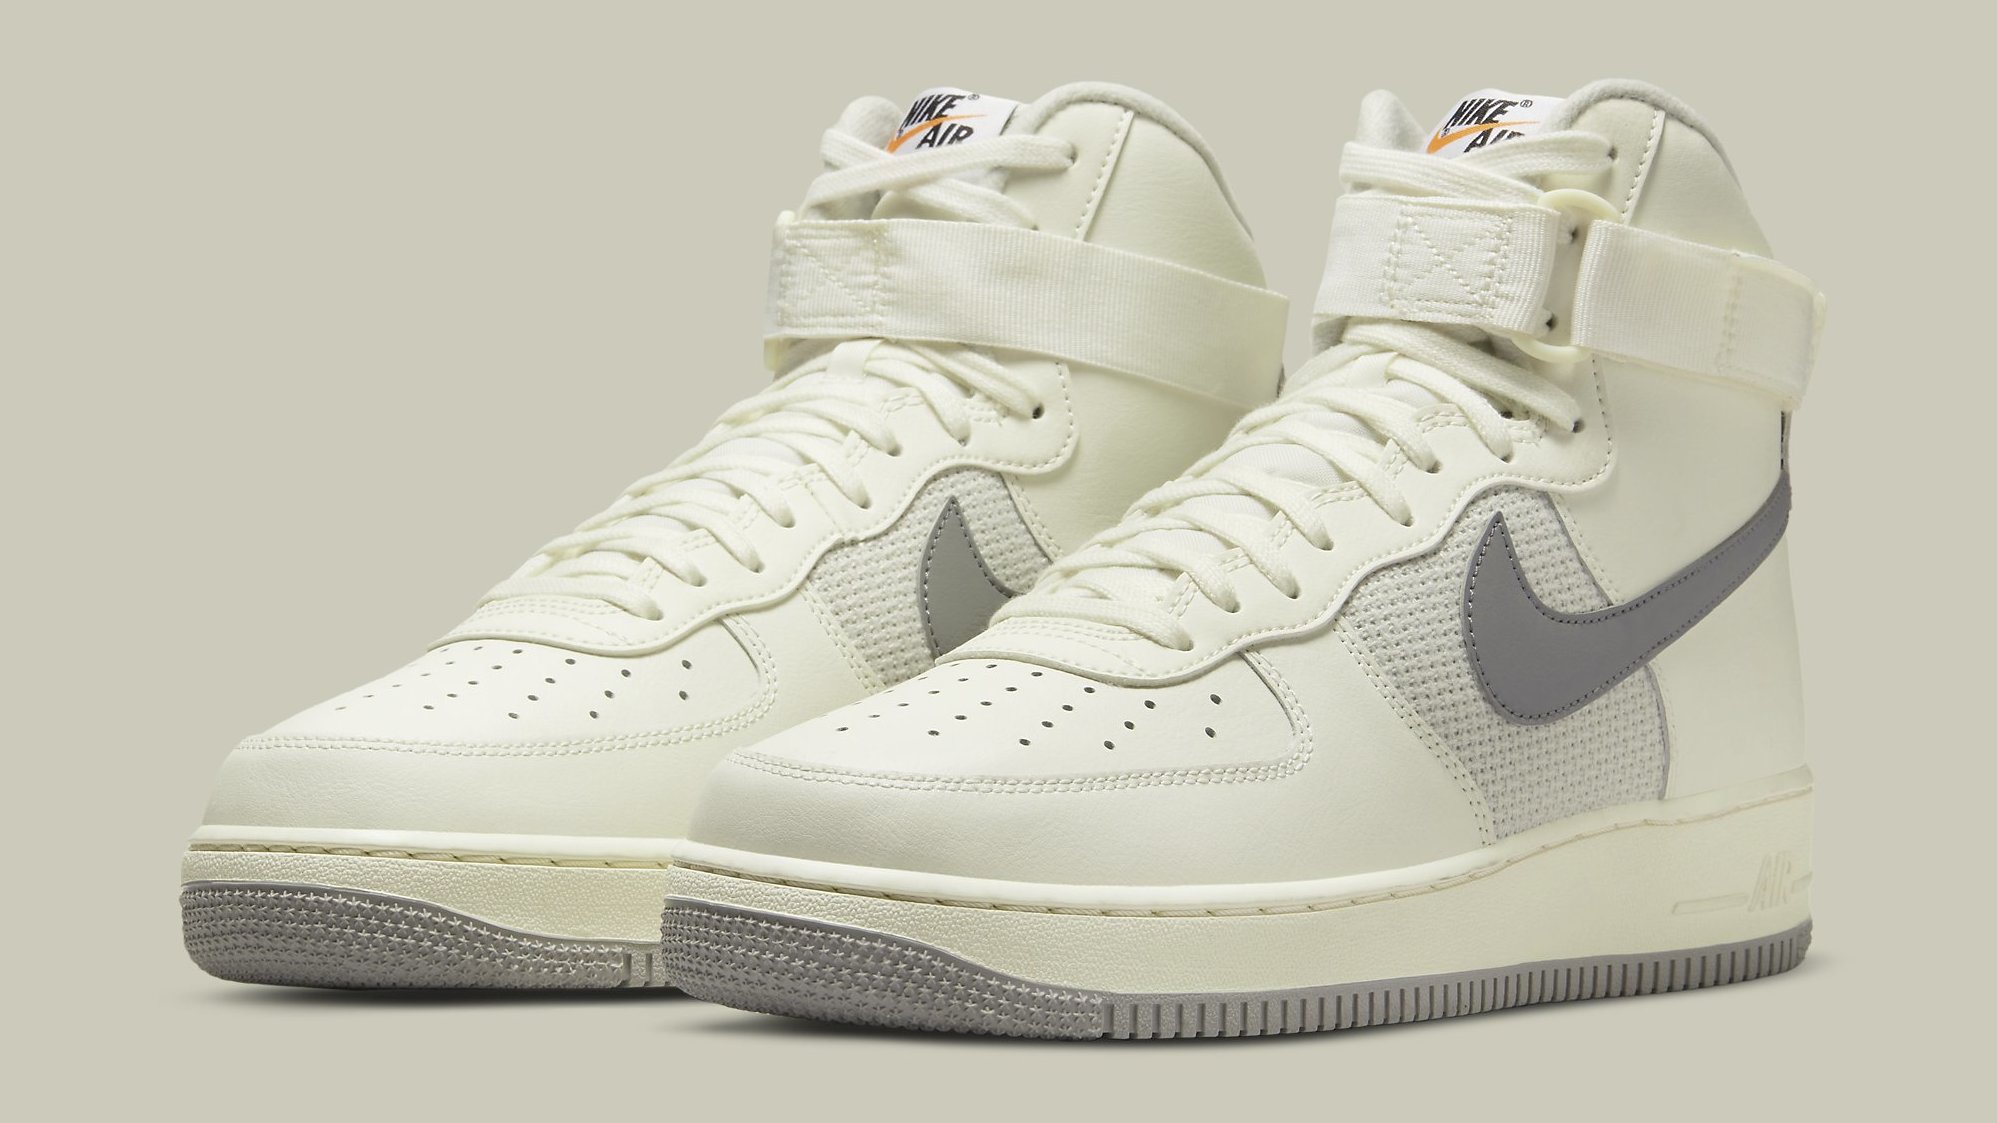 This OG-Styled Nike Air Force 1 High Is Dropping in July | Complex